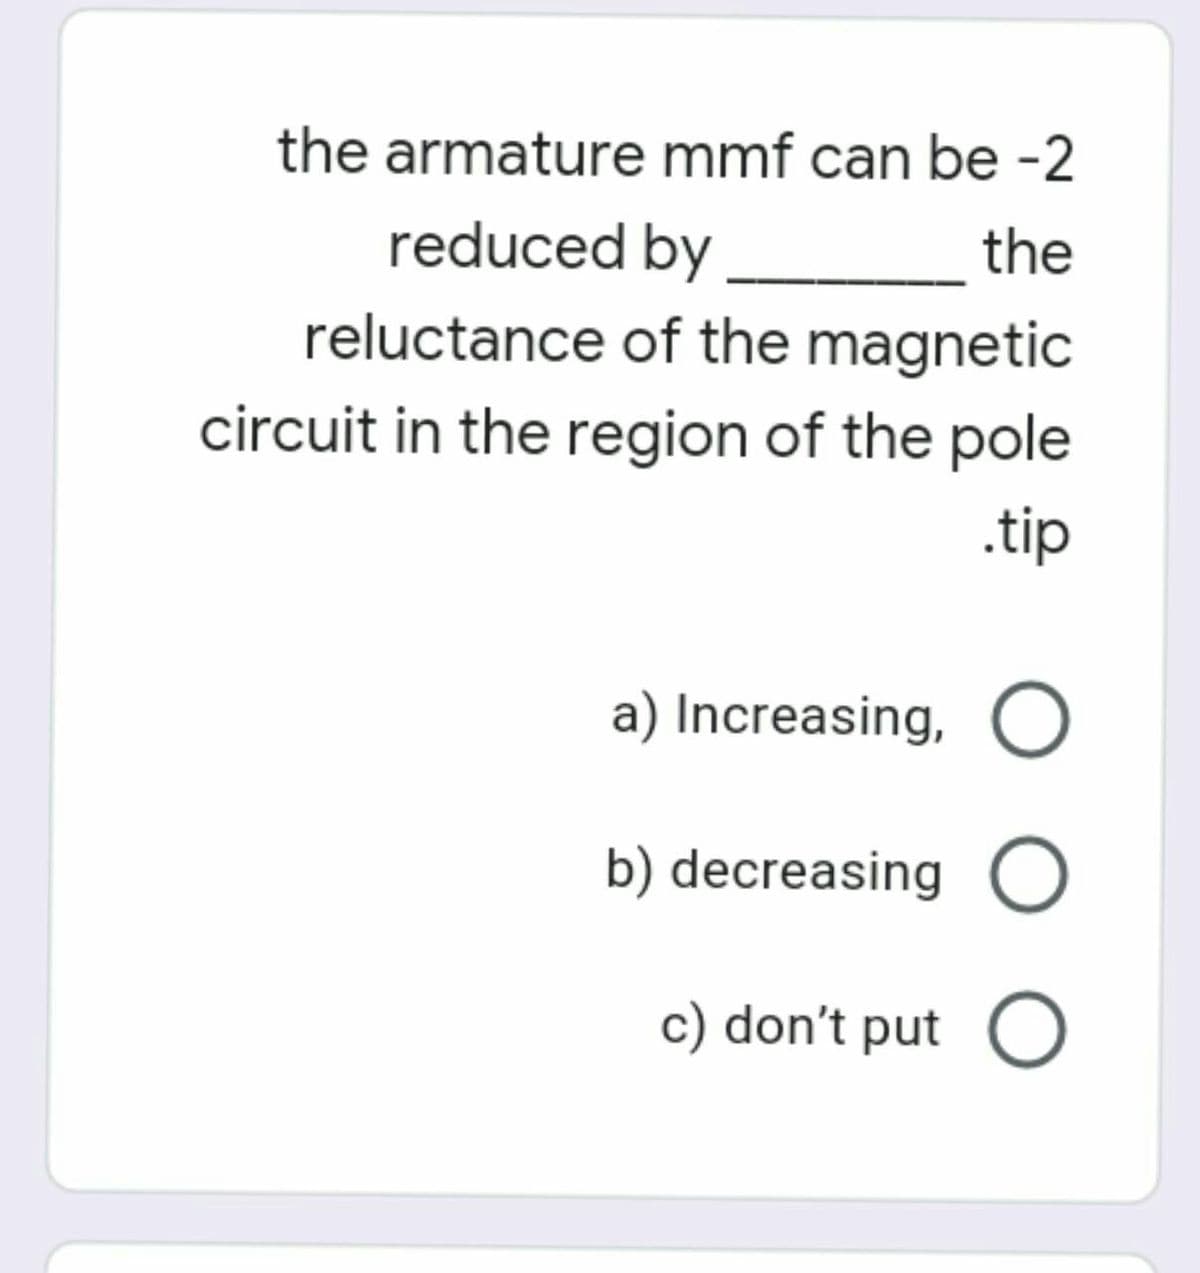 the armature mmf can be -2
reduced by
reluctance of the magnetic
the
circuit in the region of the pole
.tip
a) Increasing, O
b) decreasing O
c) don't put O
